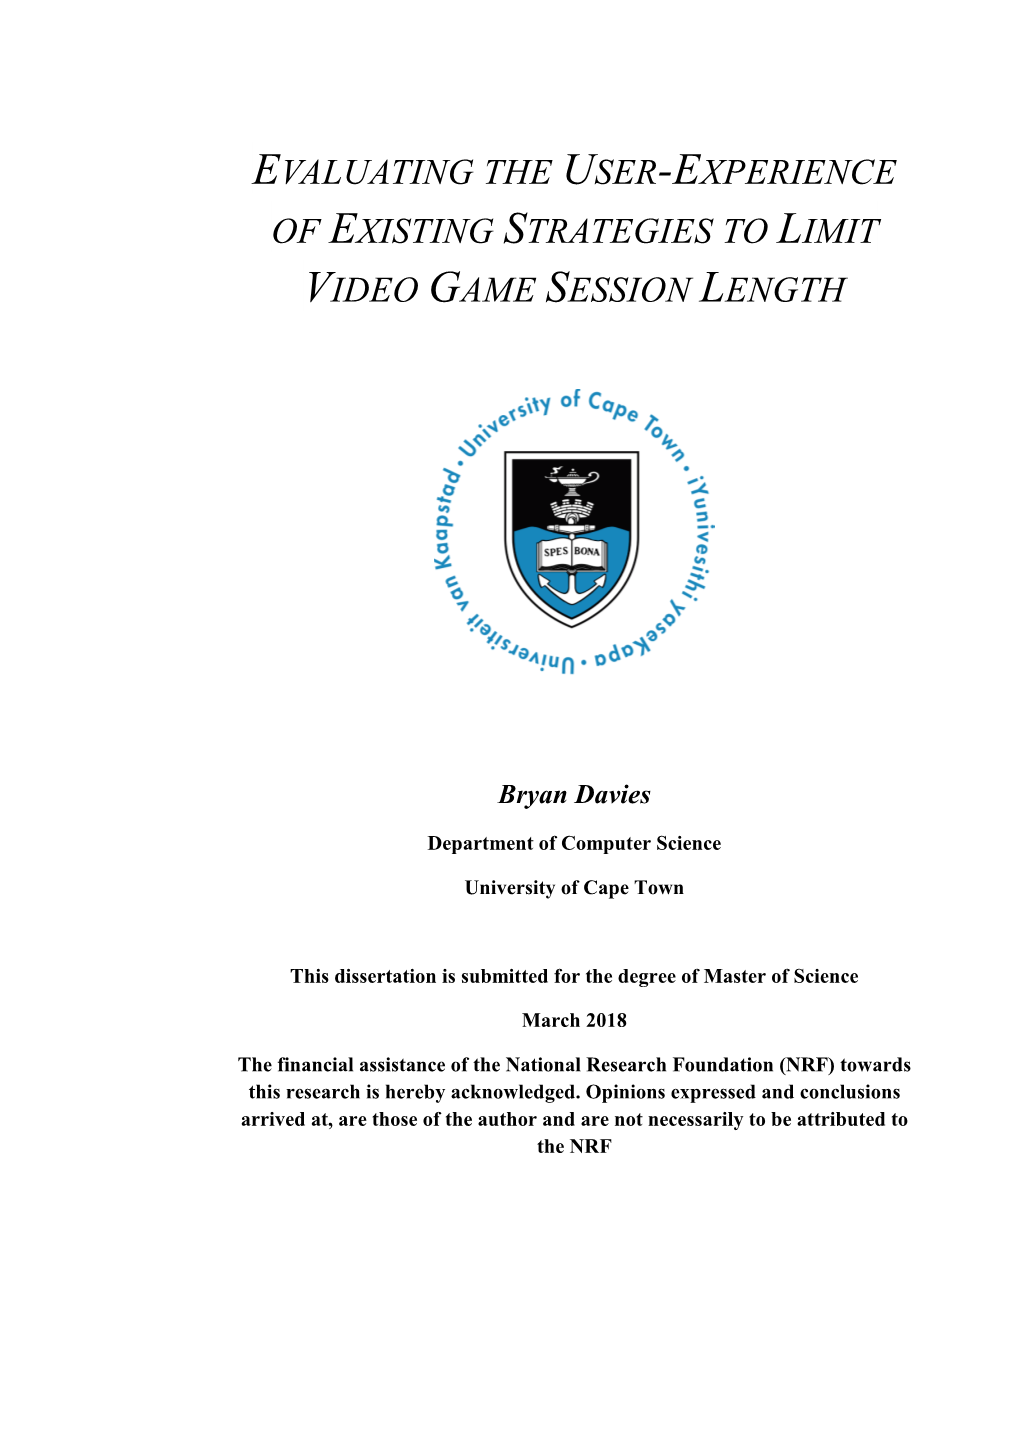 Evaluating the User-Experience of Existing Strategies to Limit Video Game Session Length